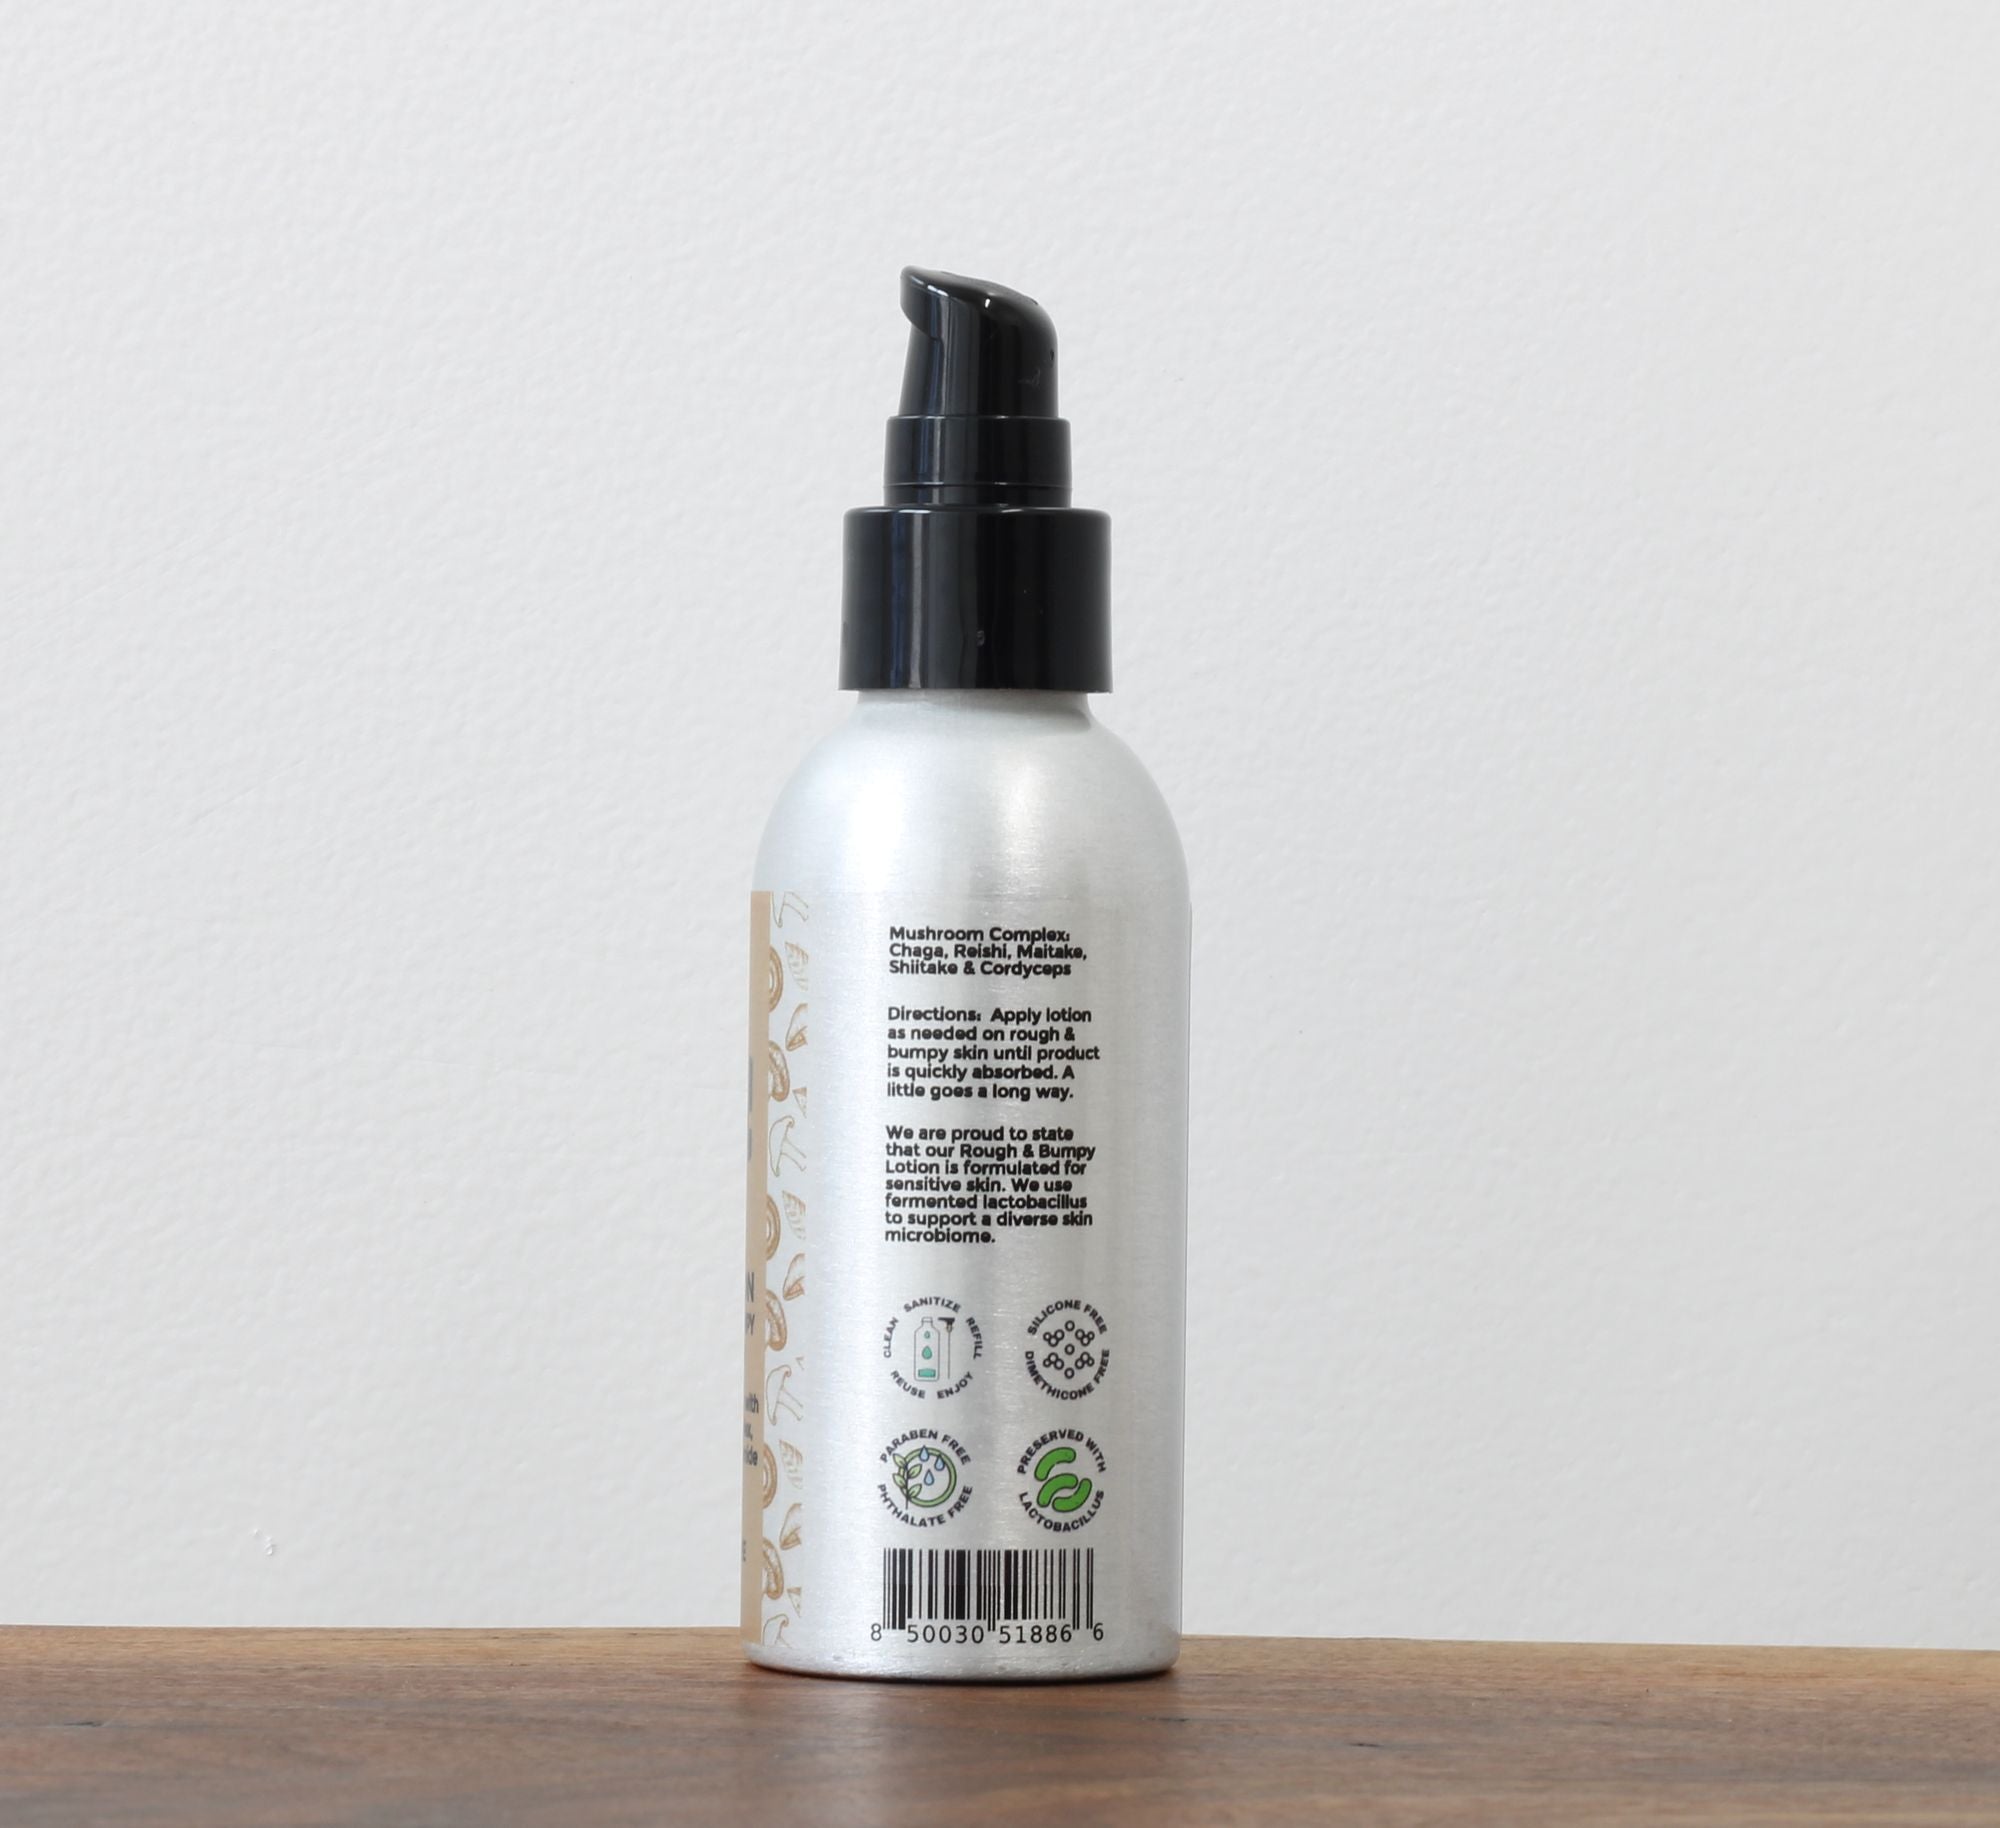 Farmbody AHA Lotion for rough and bumpy skin directions how to use lotion to smooth rough and bumpy skin with niacinnamide and mushroom skin care ingredients showing a refillable sustainable aluminum bottle for AHA Rough and Bumpy Skin Lotion